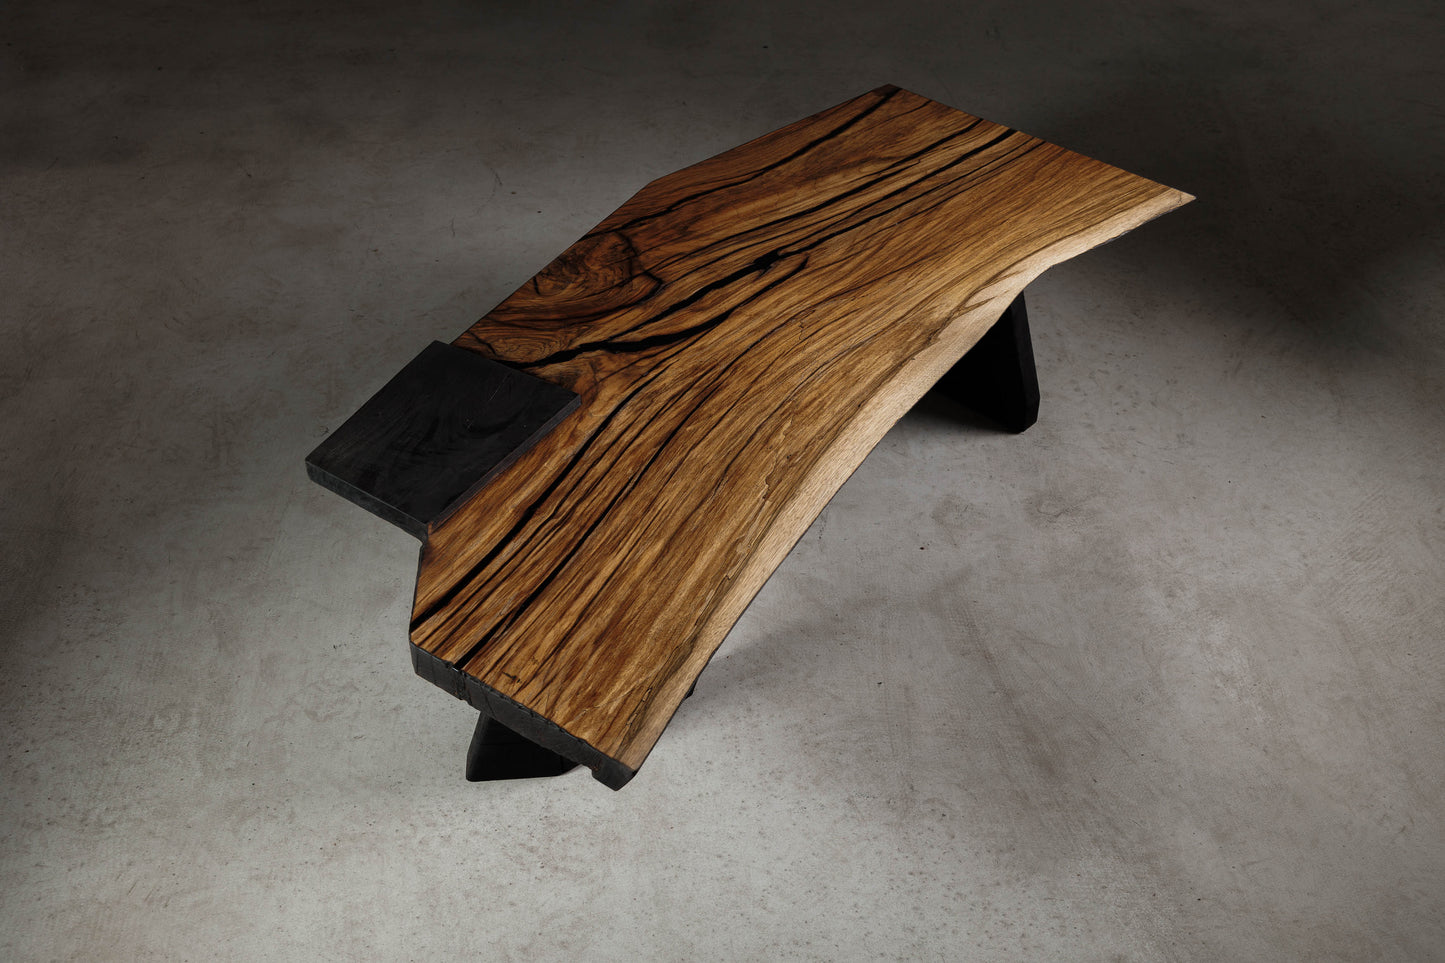 Japandi Inspired Walnut Slab Coffee Table EM108 Part Of 18Brut Collection | Image from above showcasing the whole walnut slab.